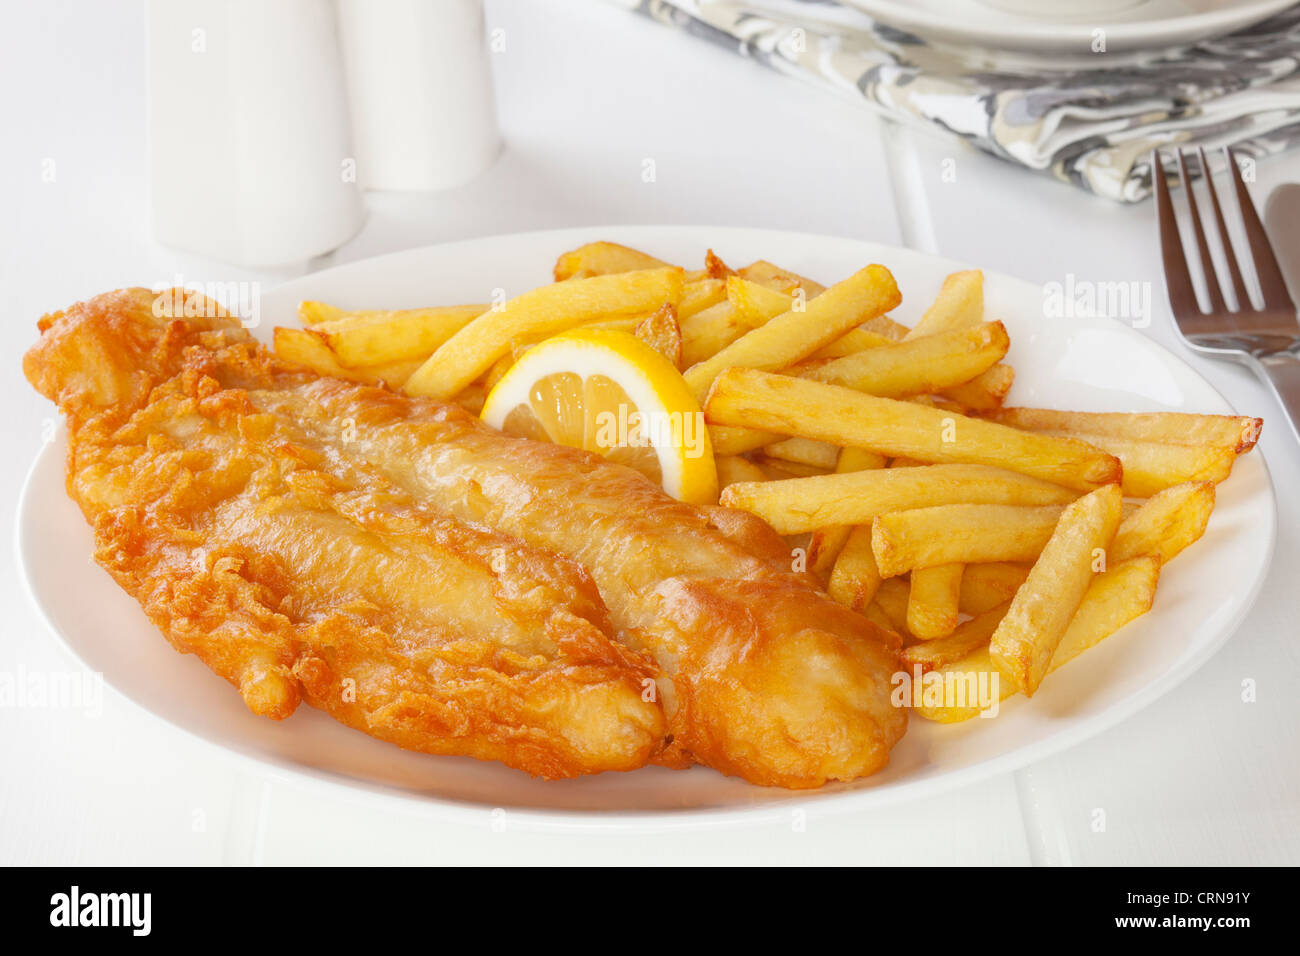 Battered fish with chips in a light, bright setting. Stock Photo